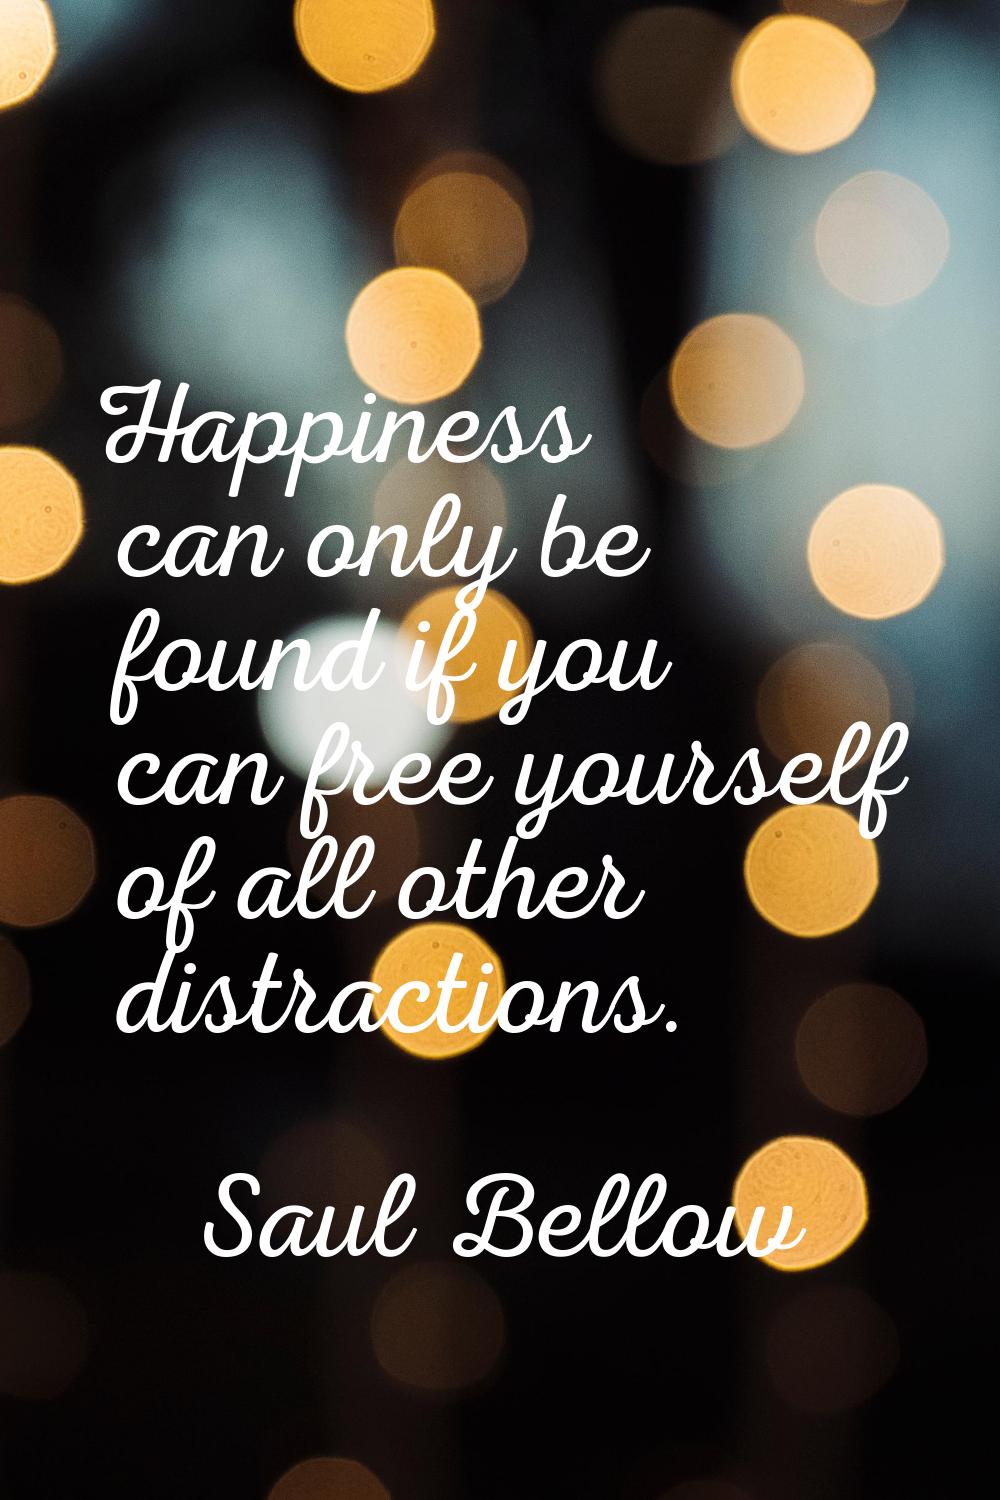 Happiness can only be found if you can free yourself of all other distractions.